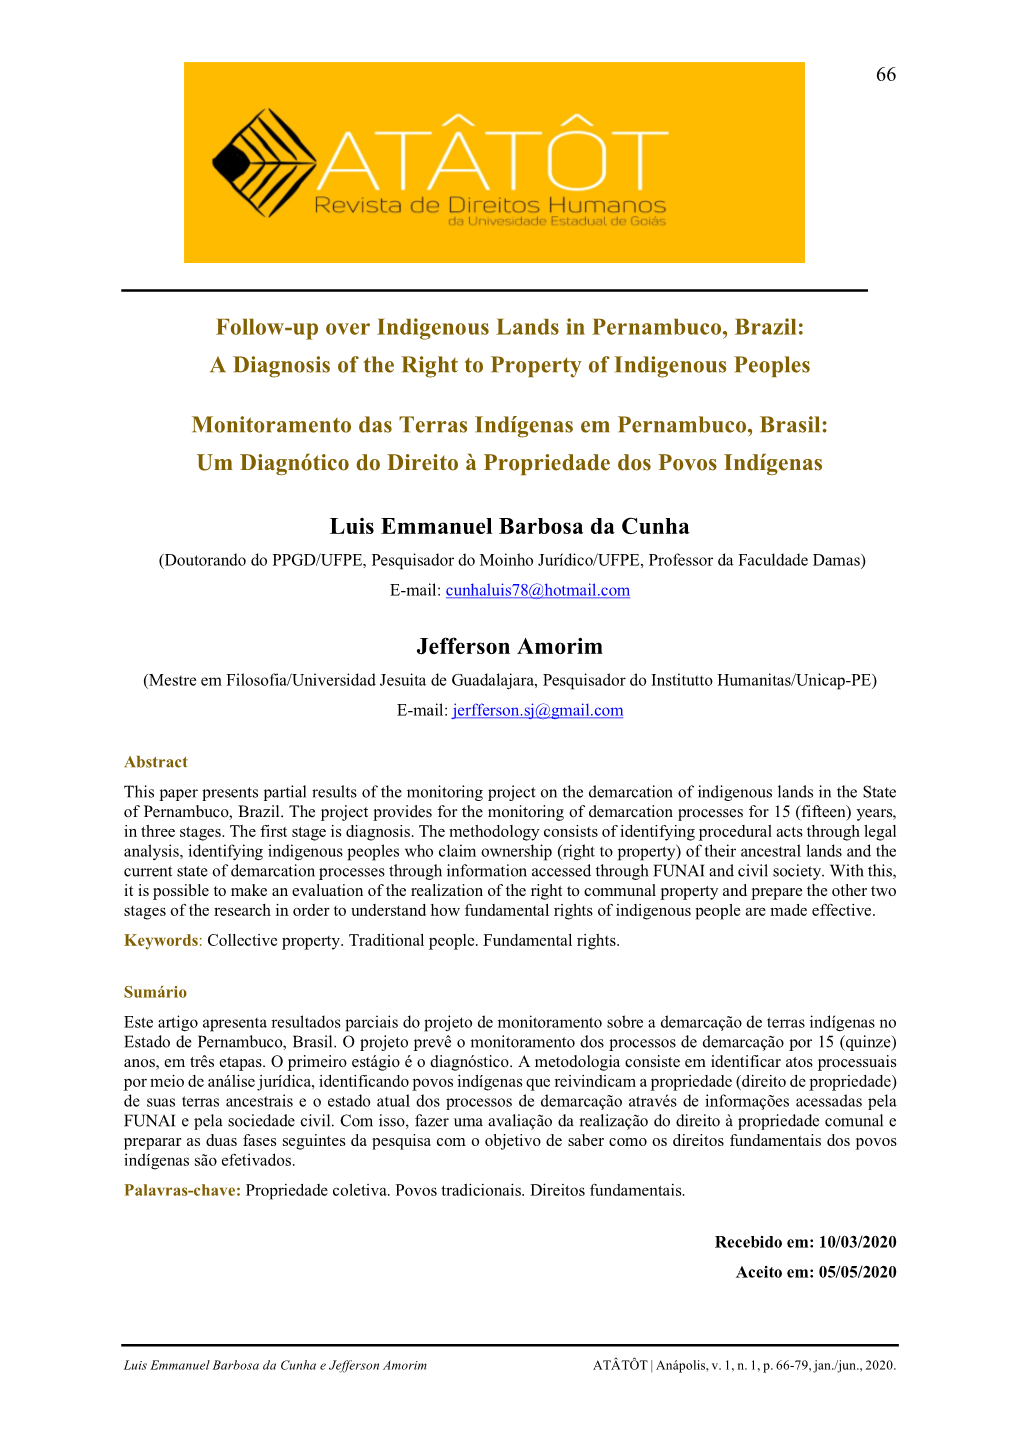 Follow-Up Over Indigenous Lands in Pernambuco, Brazil: a Diagnosis of the Right to Property of Indigenous Peoples